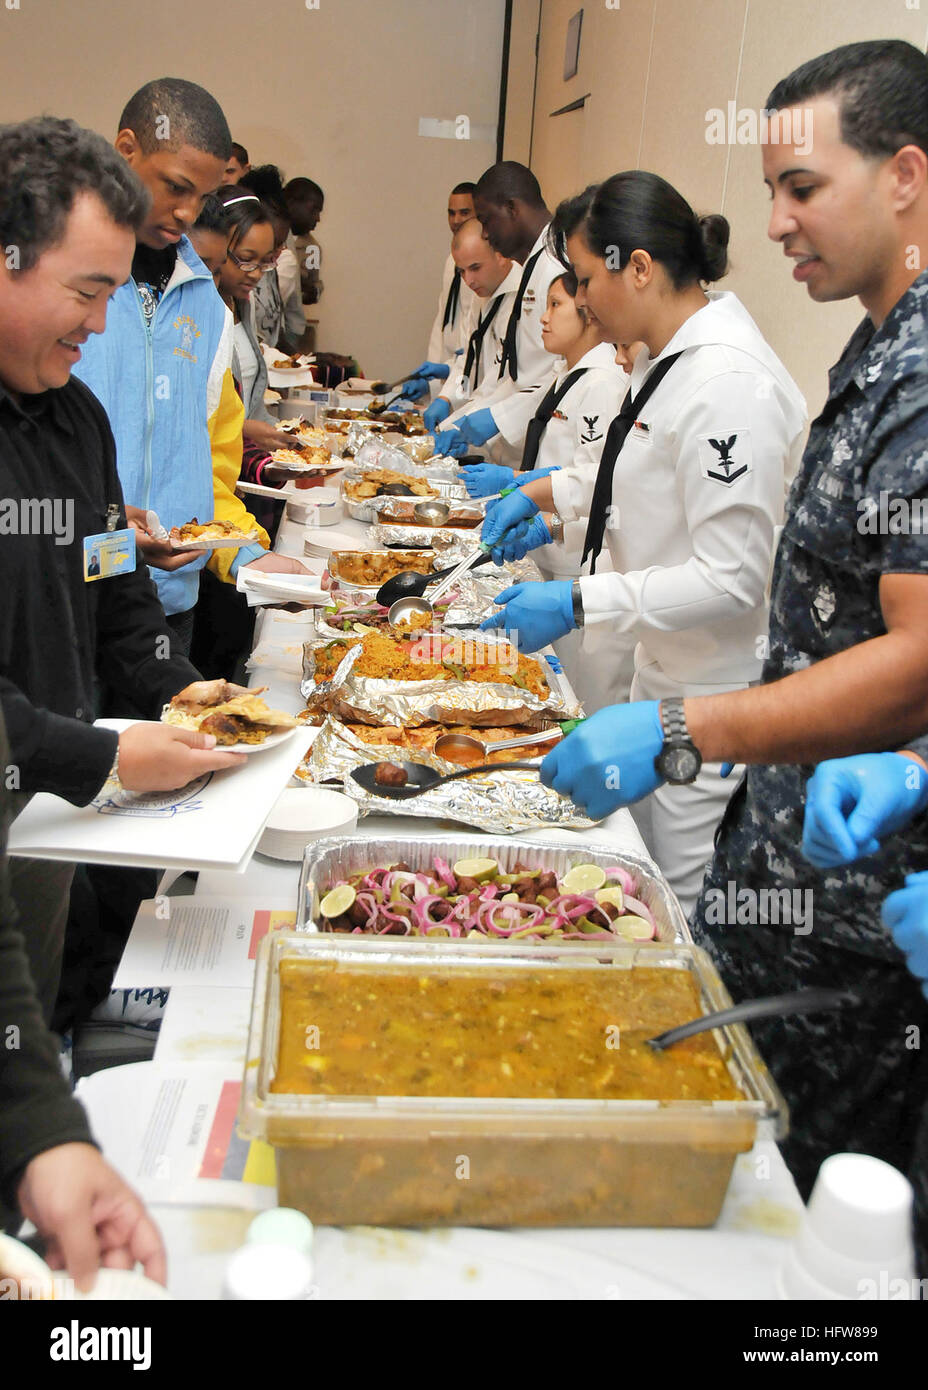 091002-N-2541H-008 PORTSMOUTH, Va. (Oct. 2, 2009) Members of the Command Diversity Committee serve  ethnic dishes from 11 different Latin countries to attendees of the Hispanic American Heritage Month ceremony in the Naval Medical Center Portsmouth auditorium. (U.S. Navy photo by Mass Communication Specialist 2nd Class William Heimbuch/Released) US Navy 091002-N-2541H-008 Members of the Command Diversity Committee serve ethnic dishes from 11 different Latin countries to attendees of the Hispanic American Heritage Month ceremony in the Naval Medical Center Portsmouth a Stock Photo